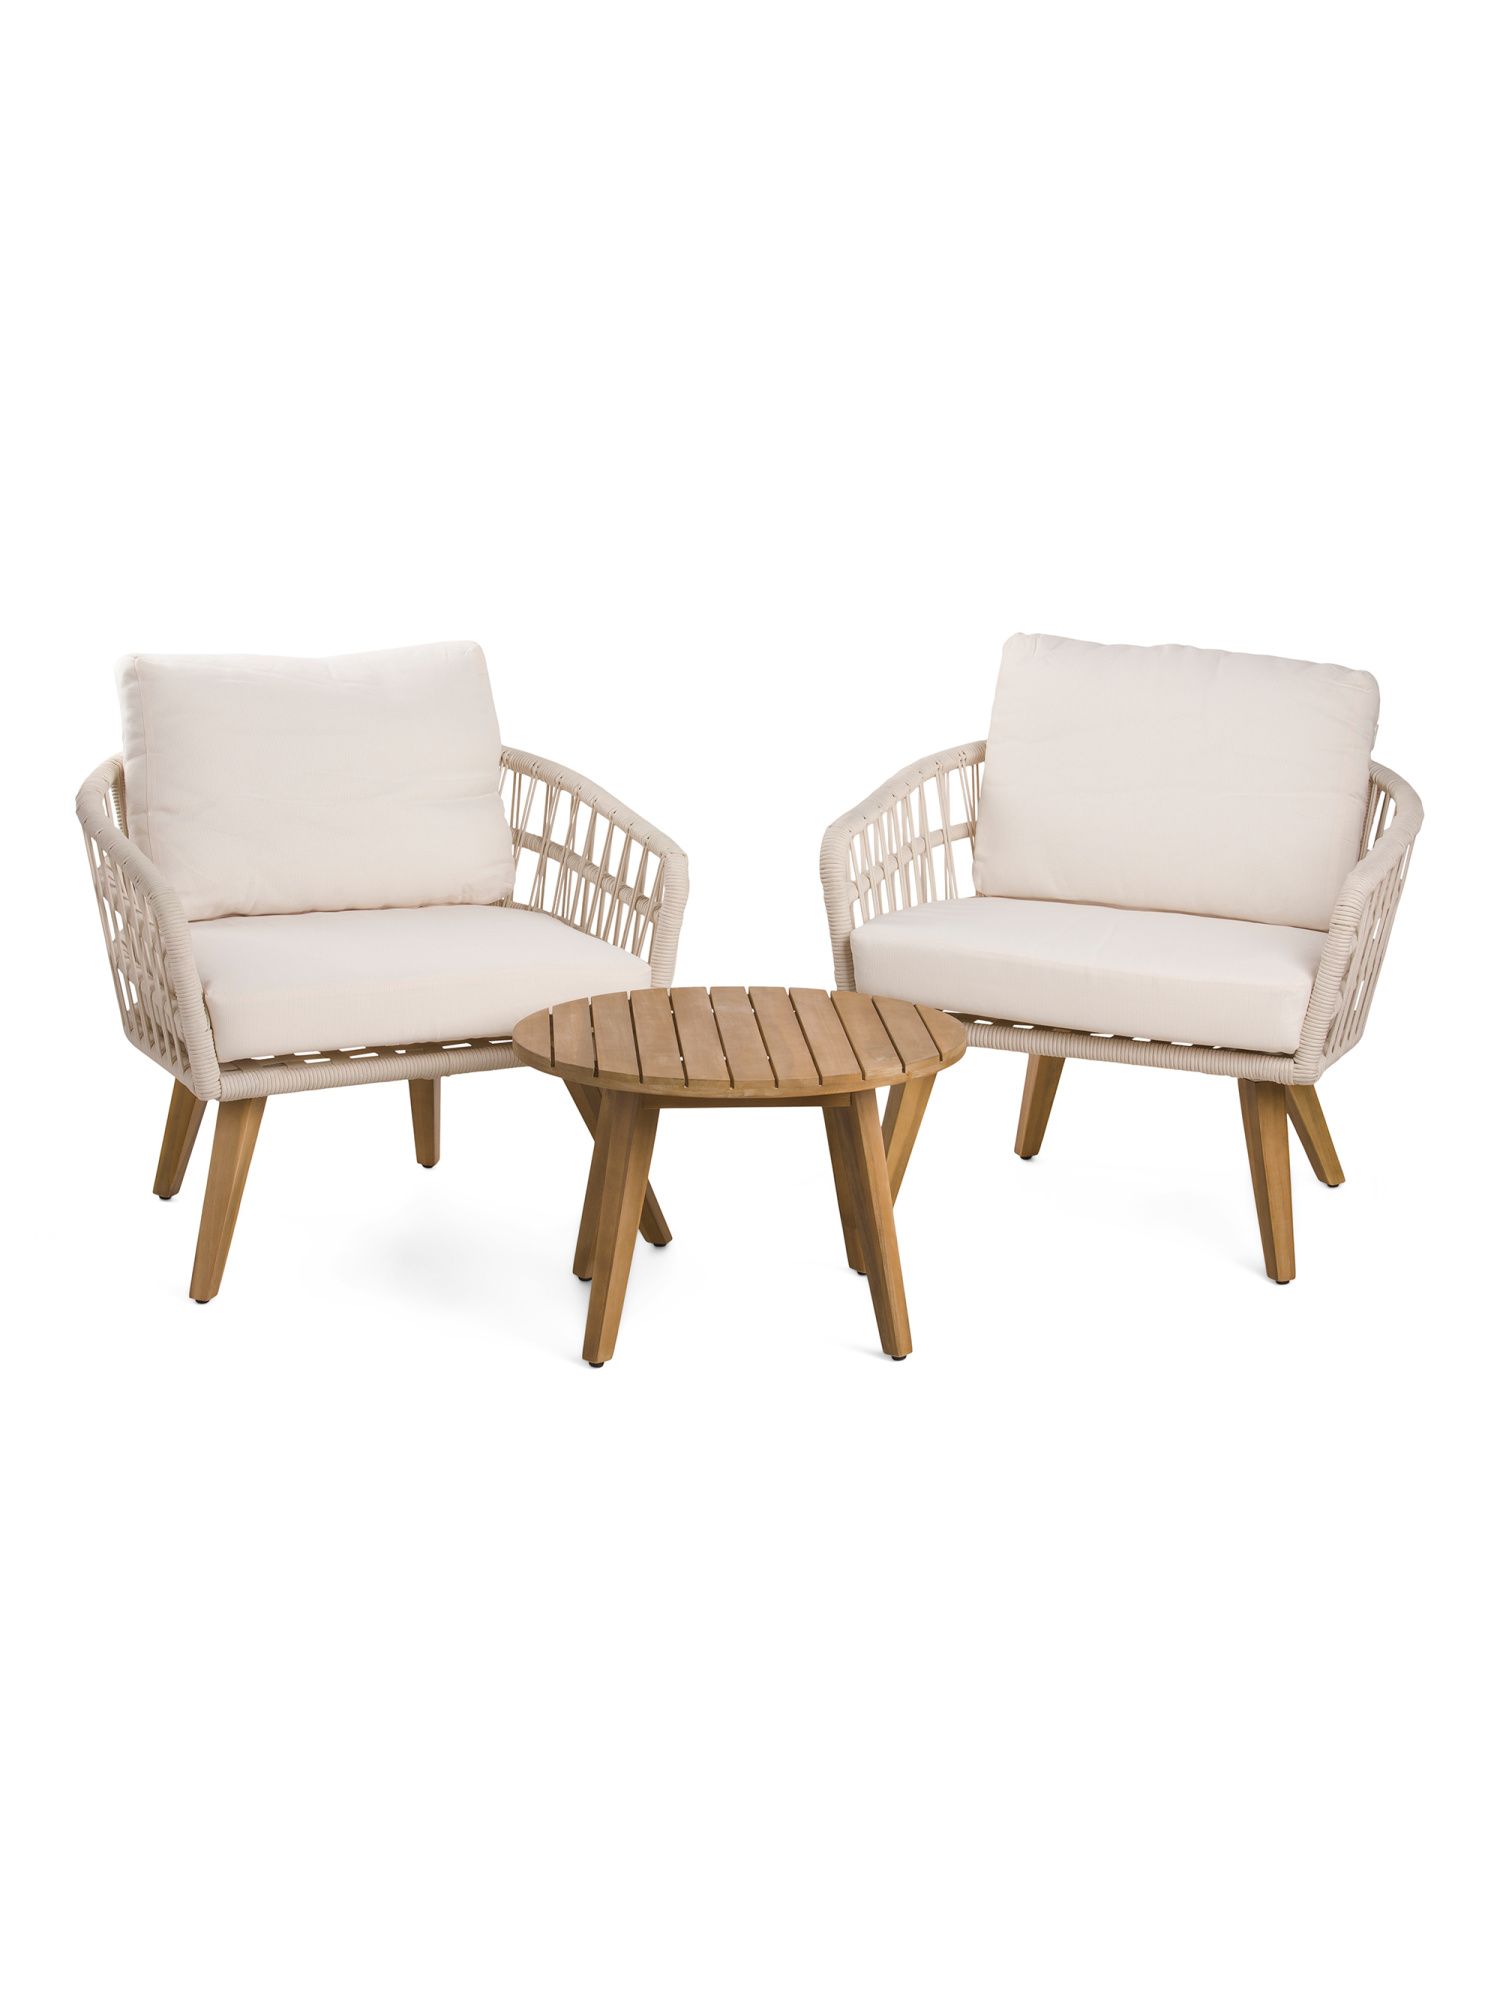 3pc Outdoor Rope And Acacia Furniture Set | The Global Decor Shop | Marshalls | Marshalls